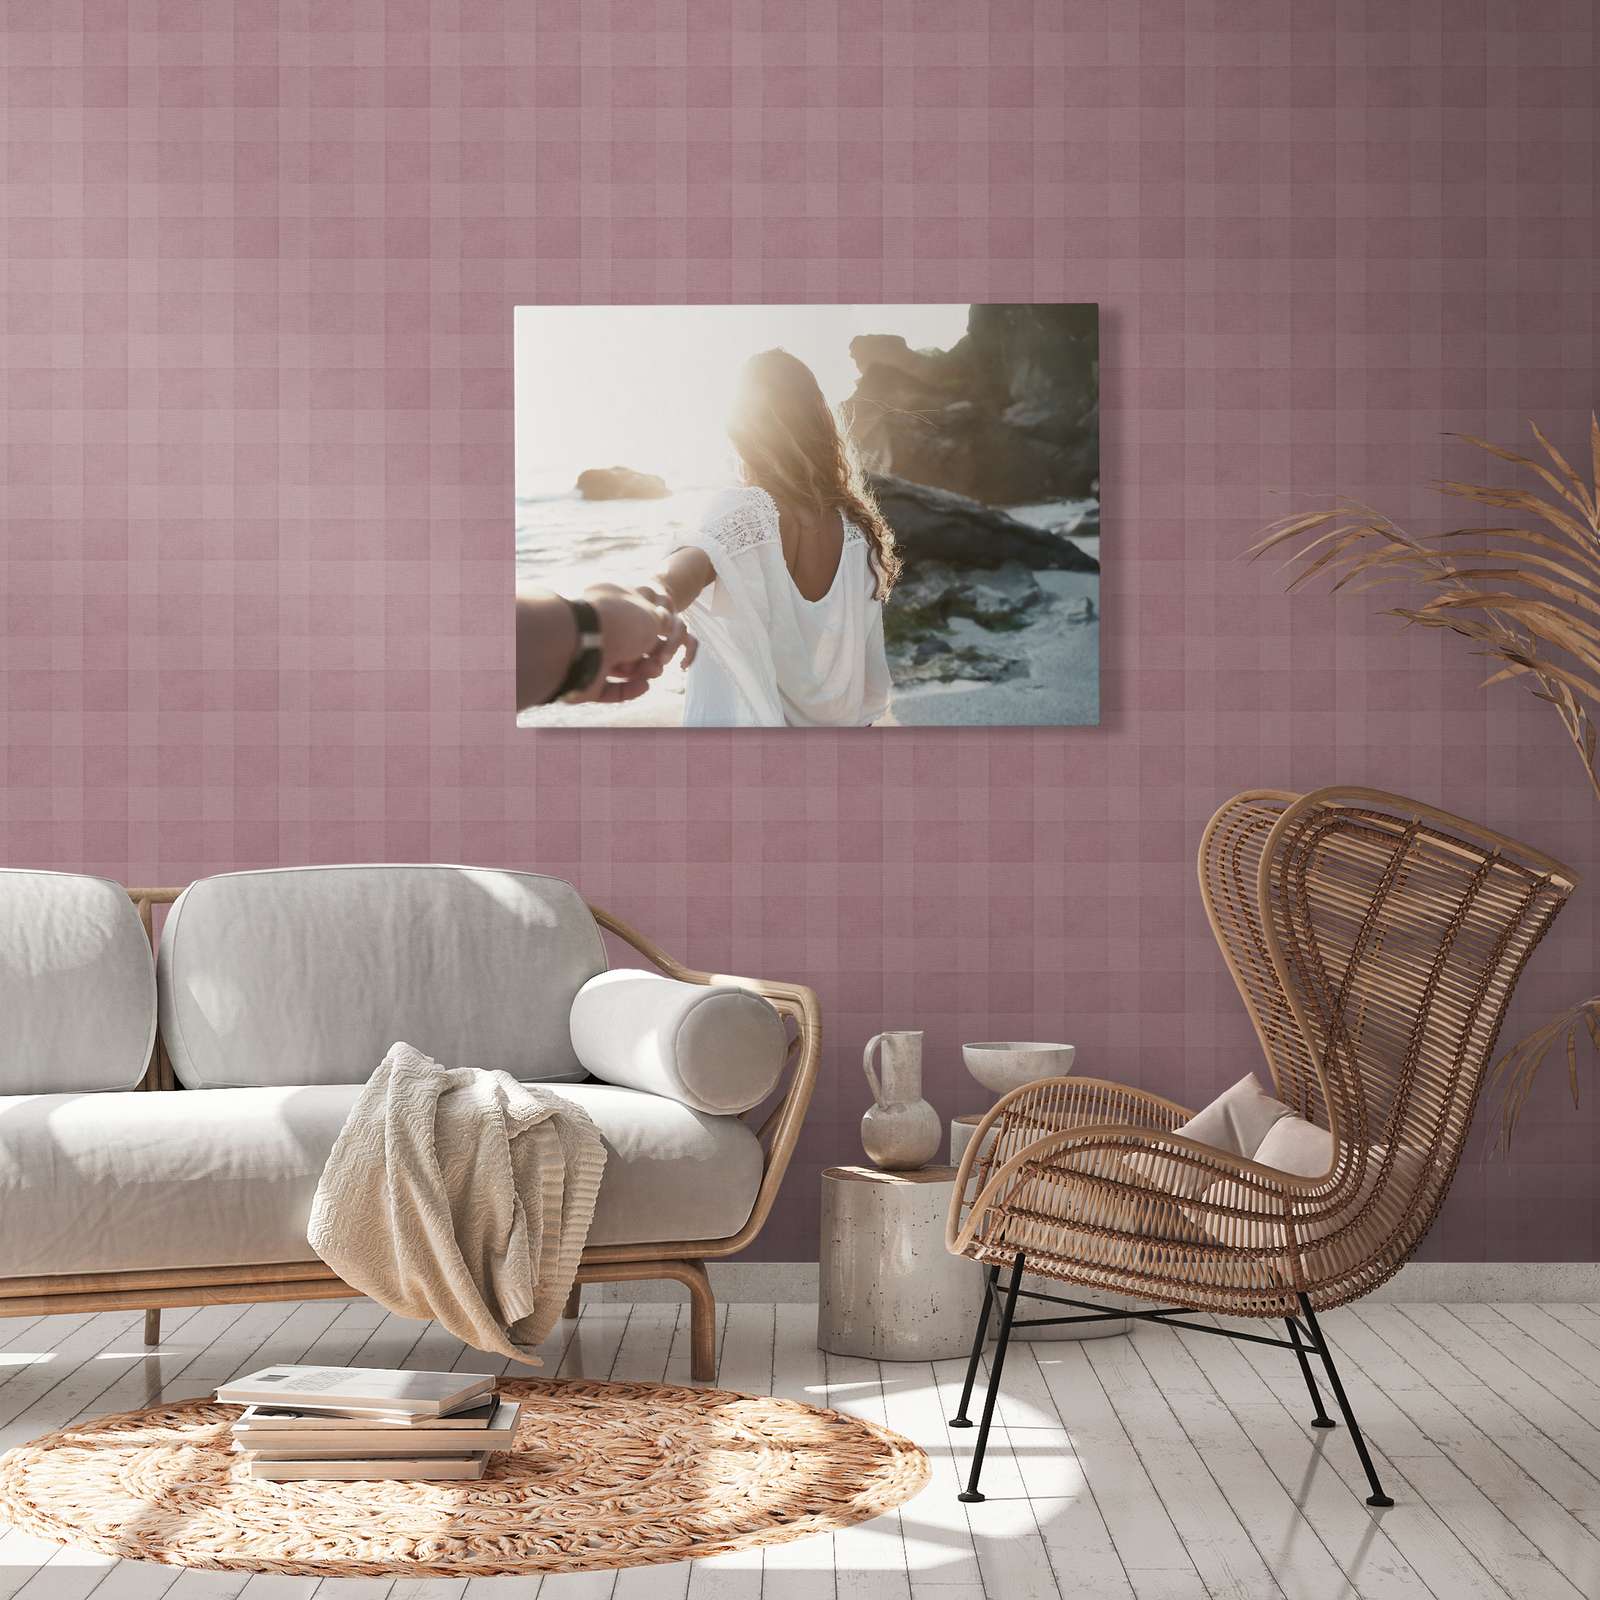             Check wallpaper with linen look PVC-free - Purple
        